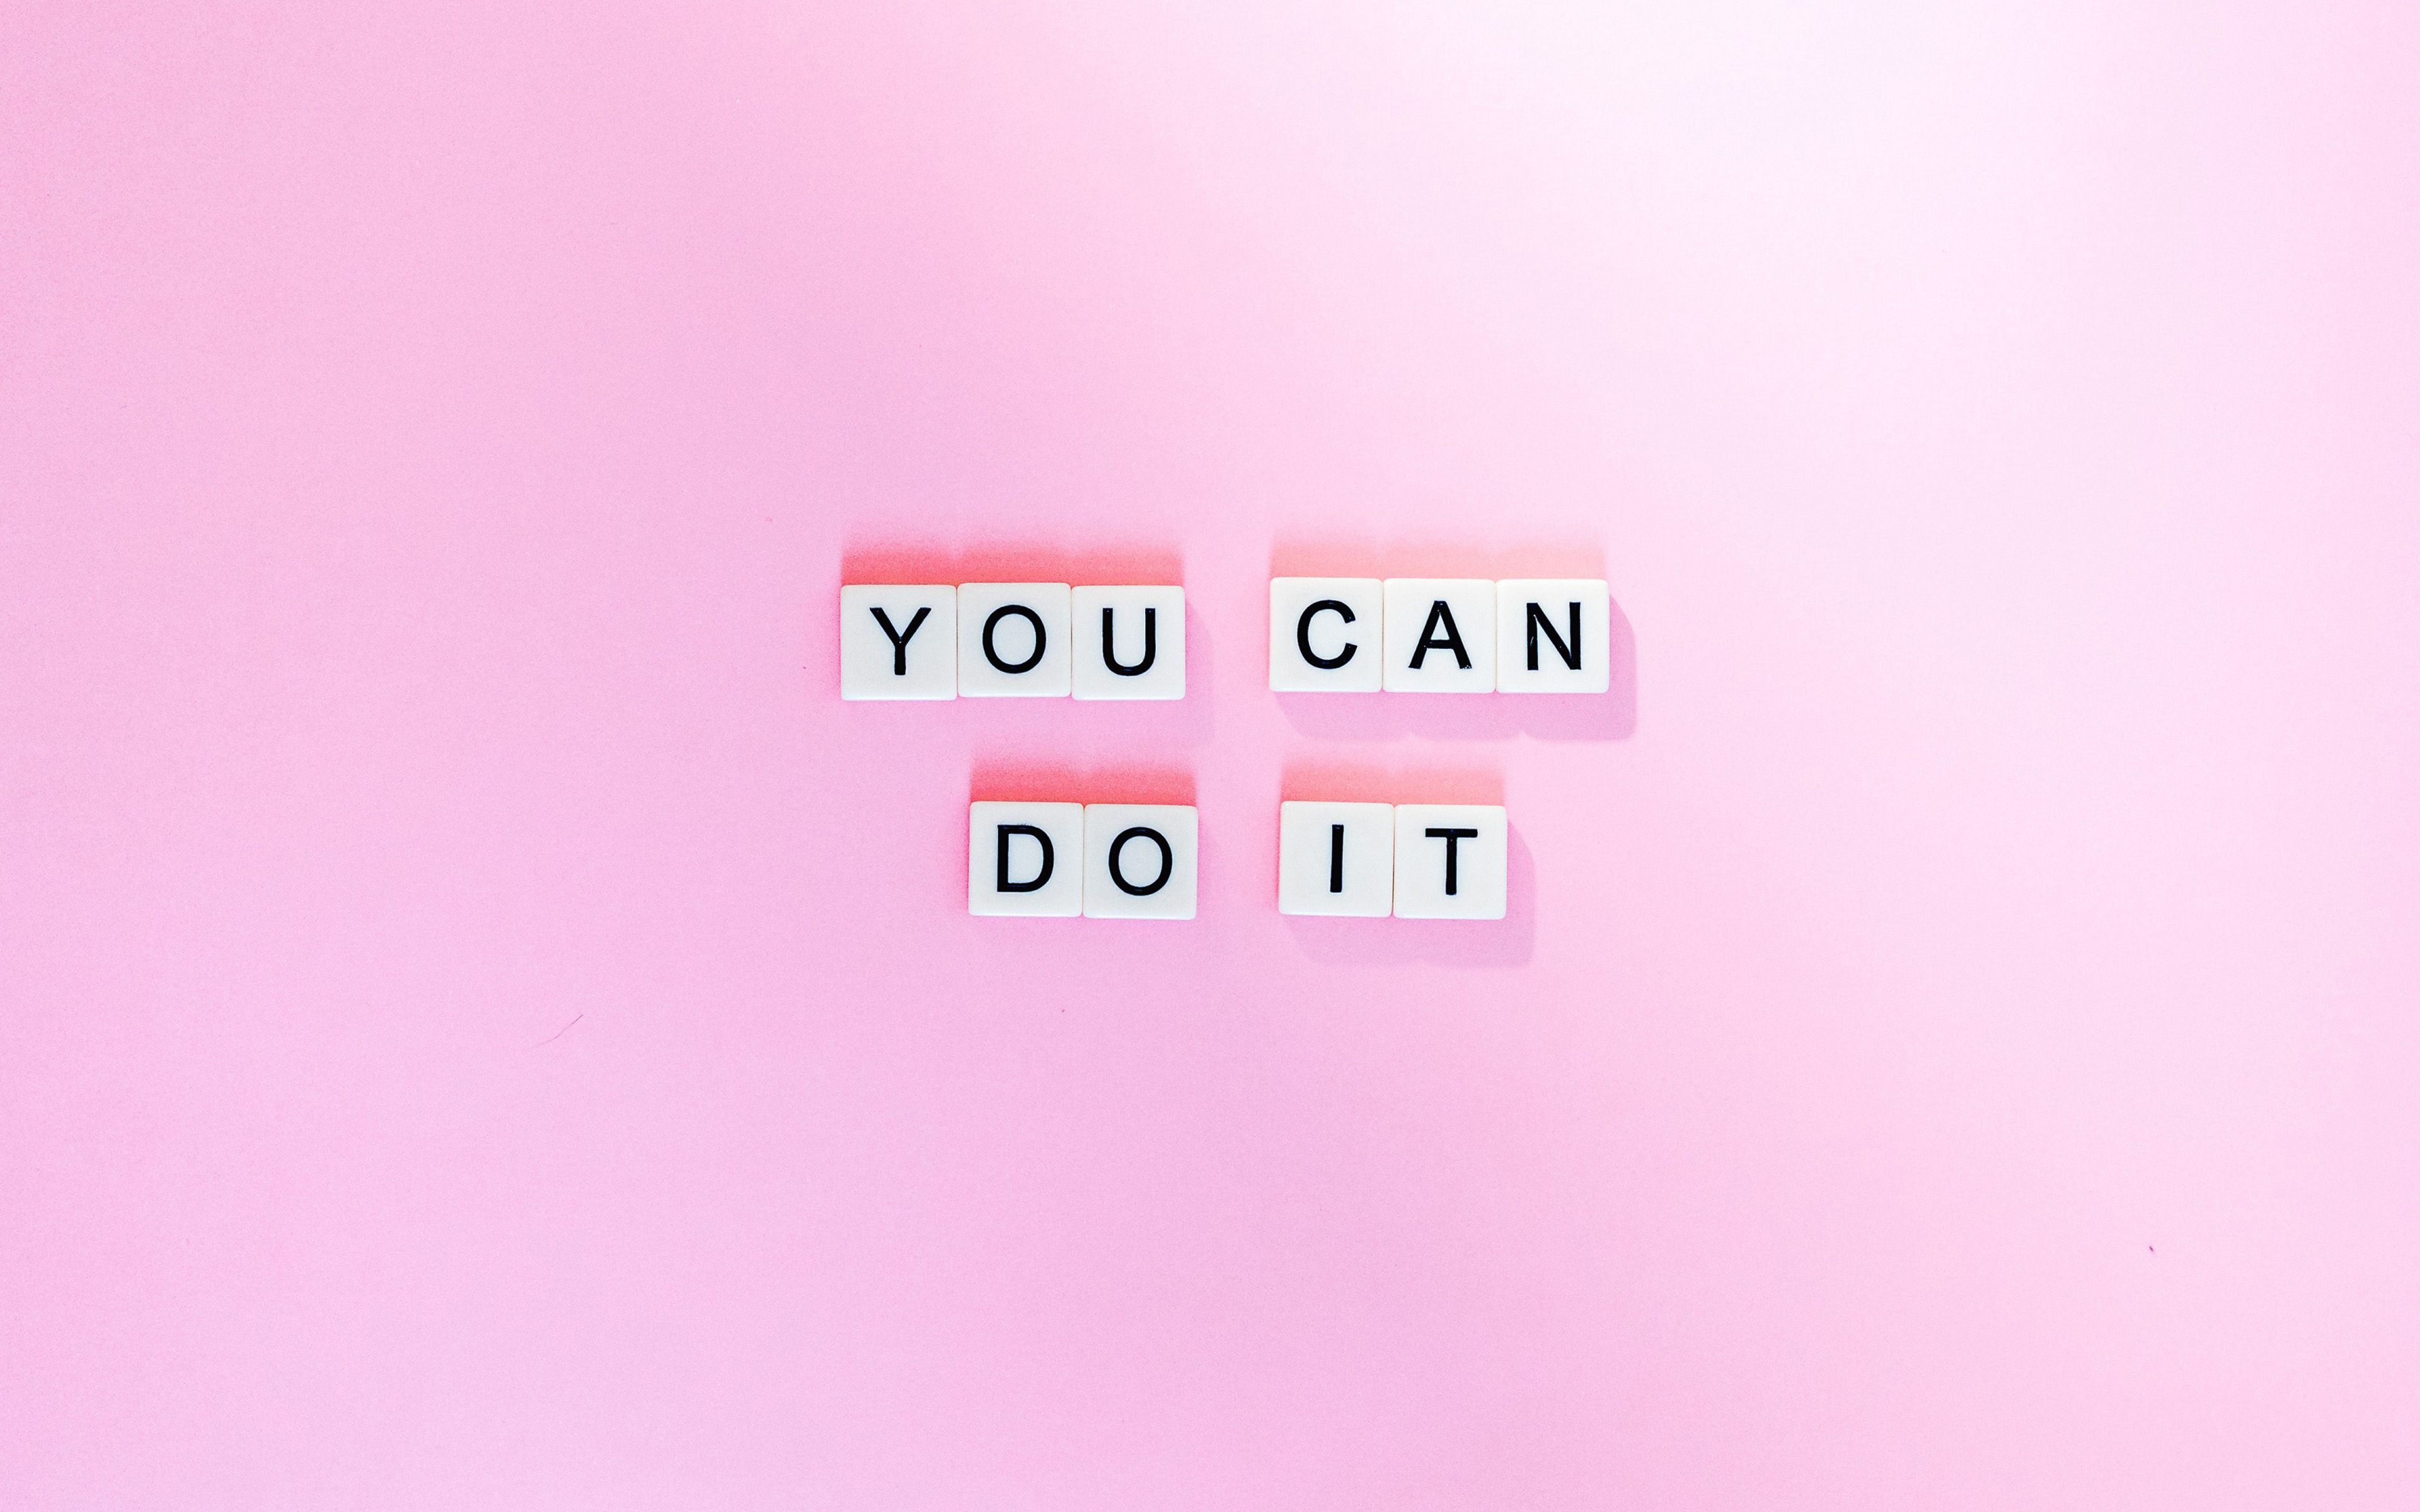 Download wallpaper You Can Do It, creative art, motivation quotes